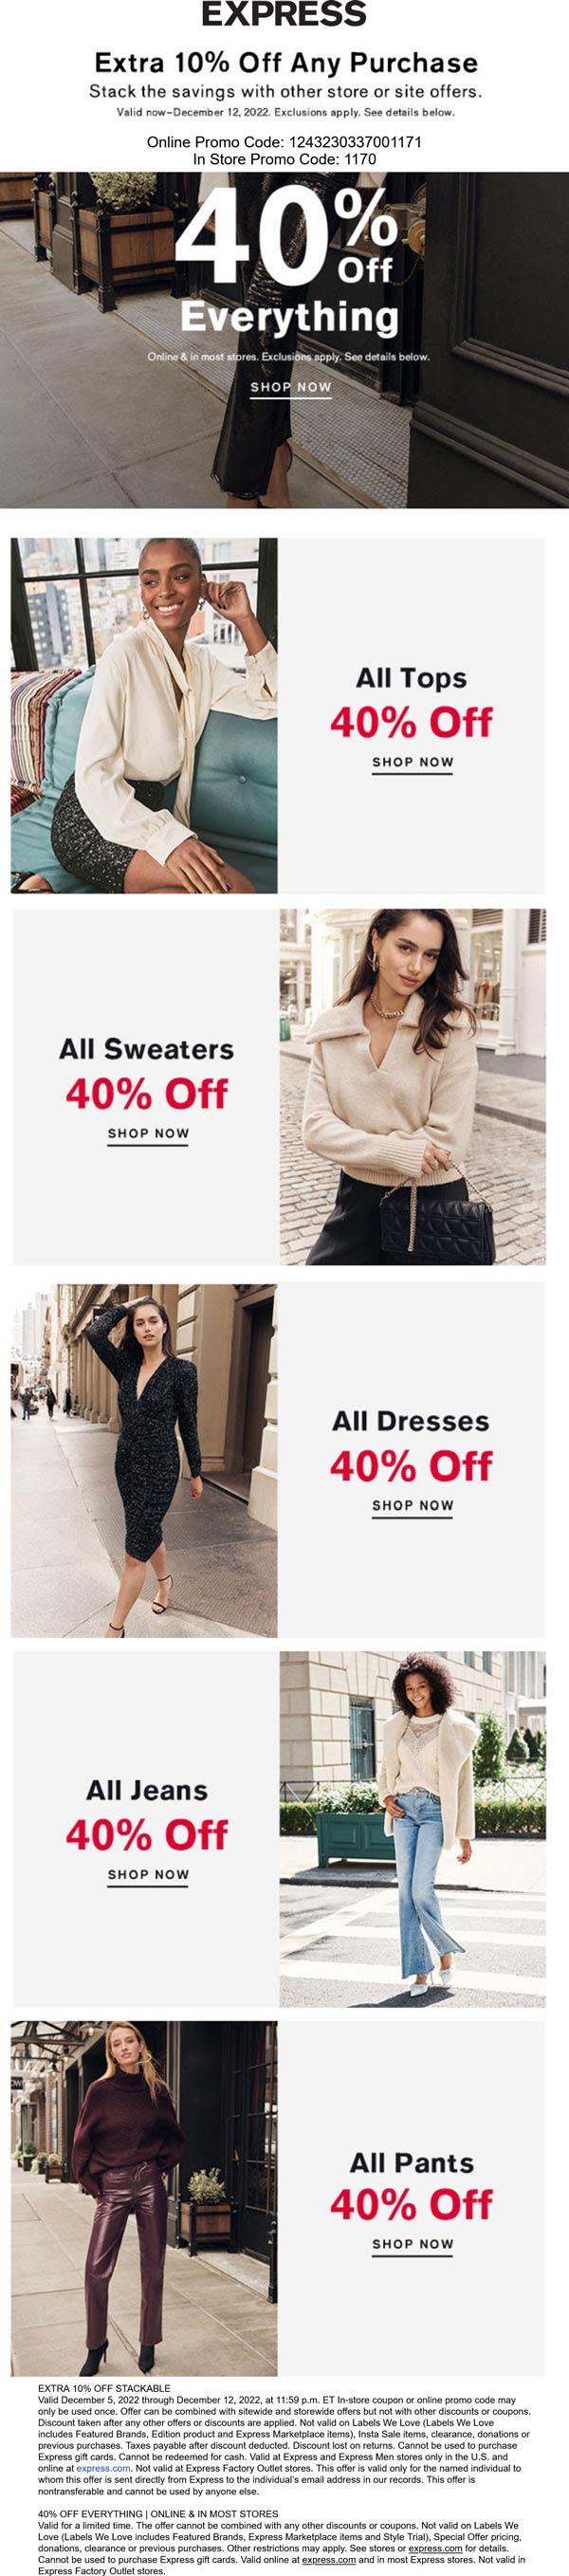 Express stores Coupon  40-50% off everything at Express, or online via promo code 1243230337001171 #express 